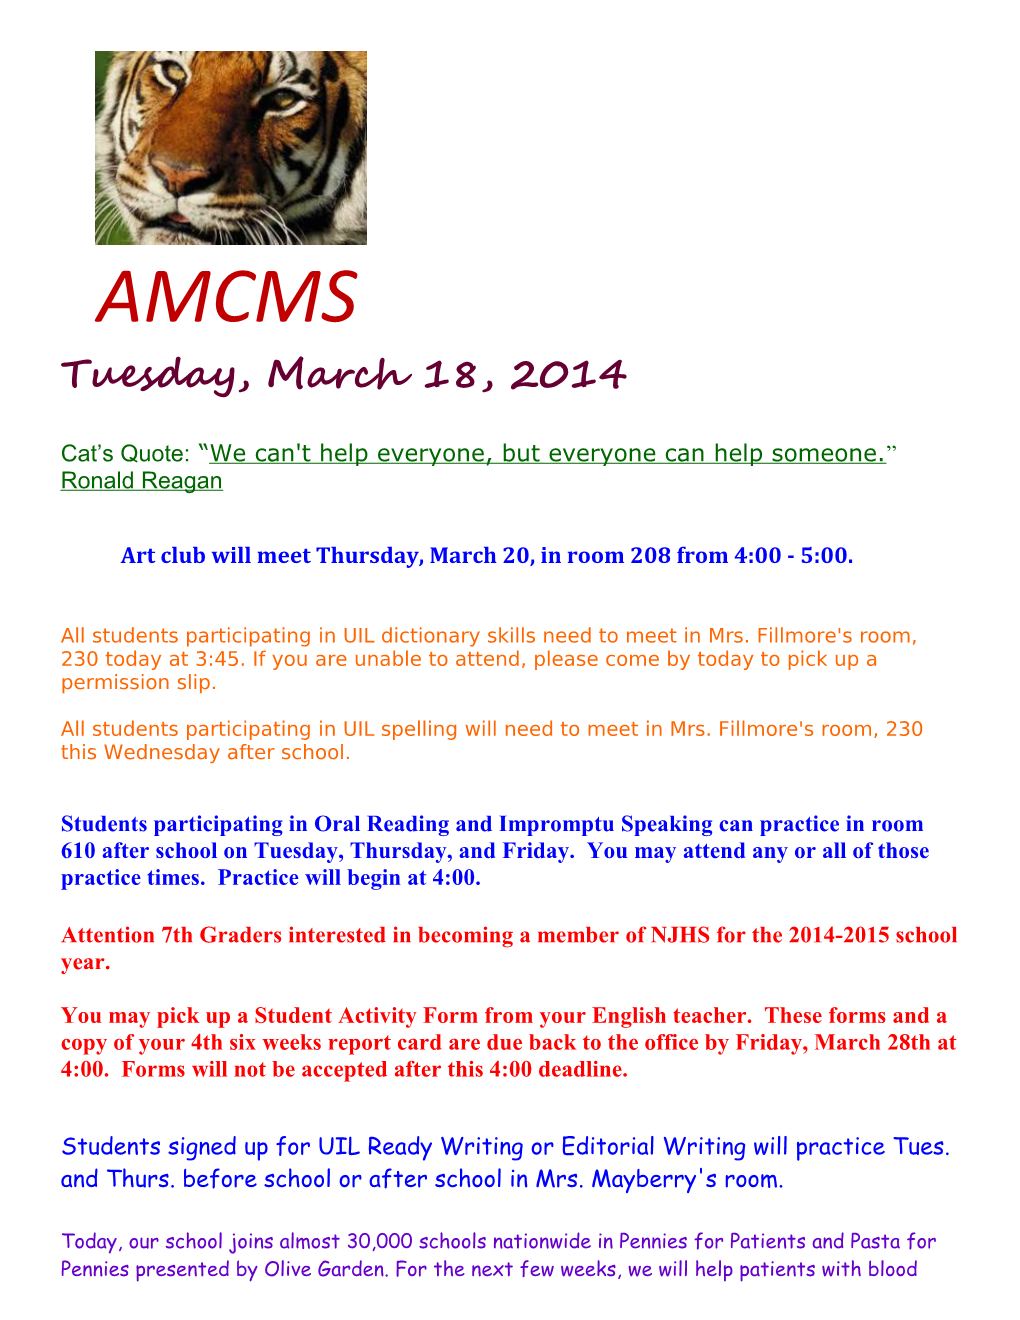 Art Club Will Meet Thursday, March 20, in Room 208 from 4:00 - 5:00